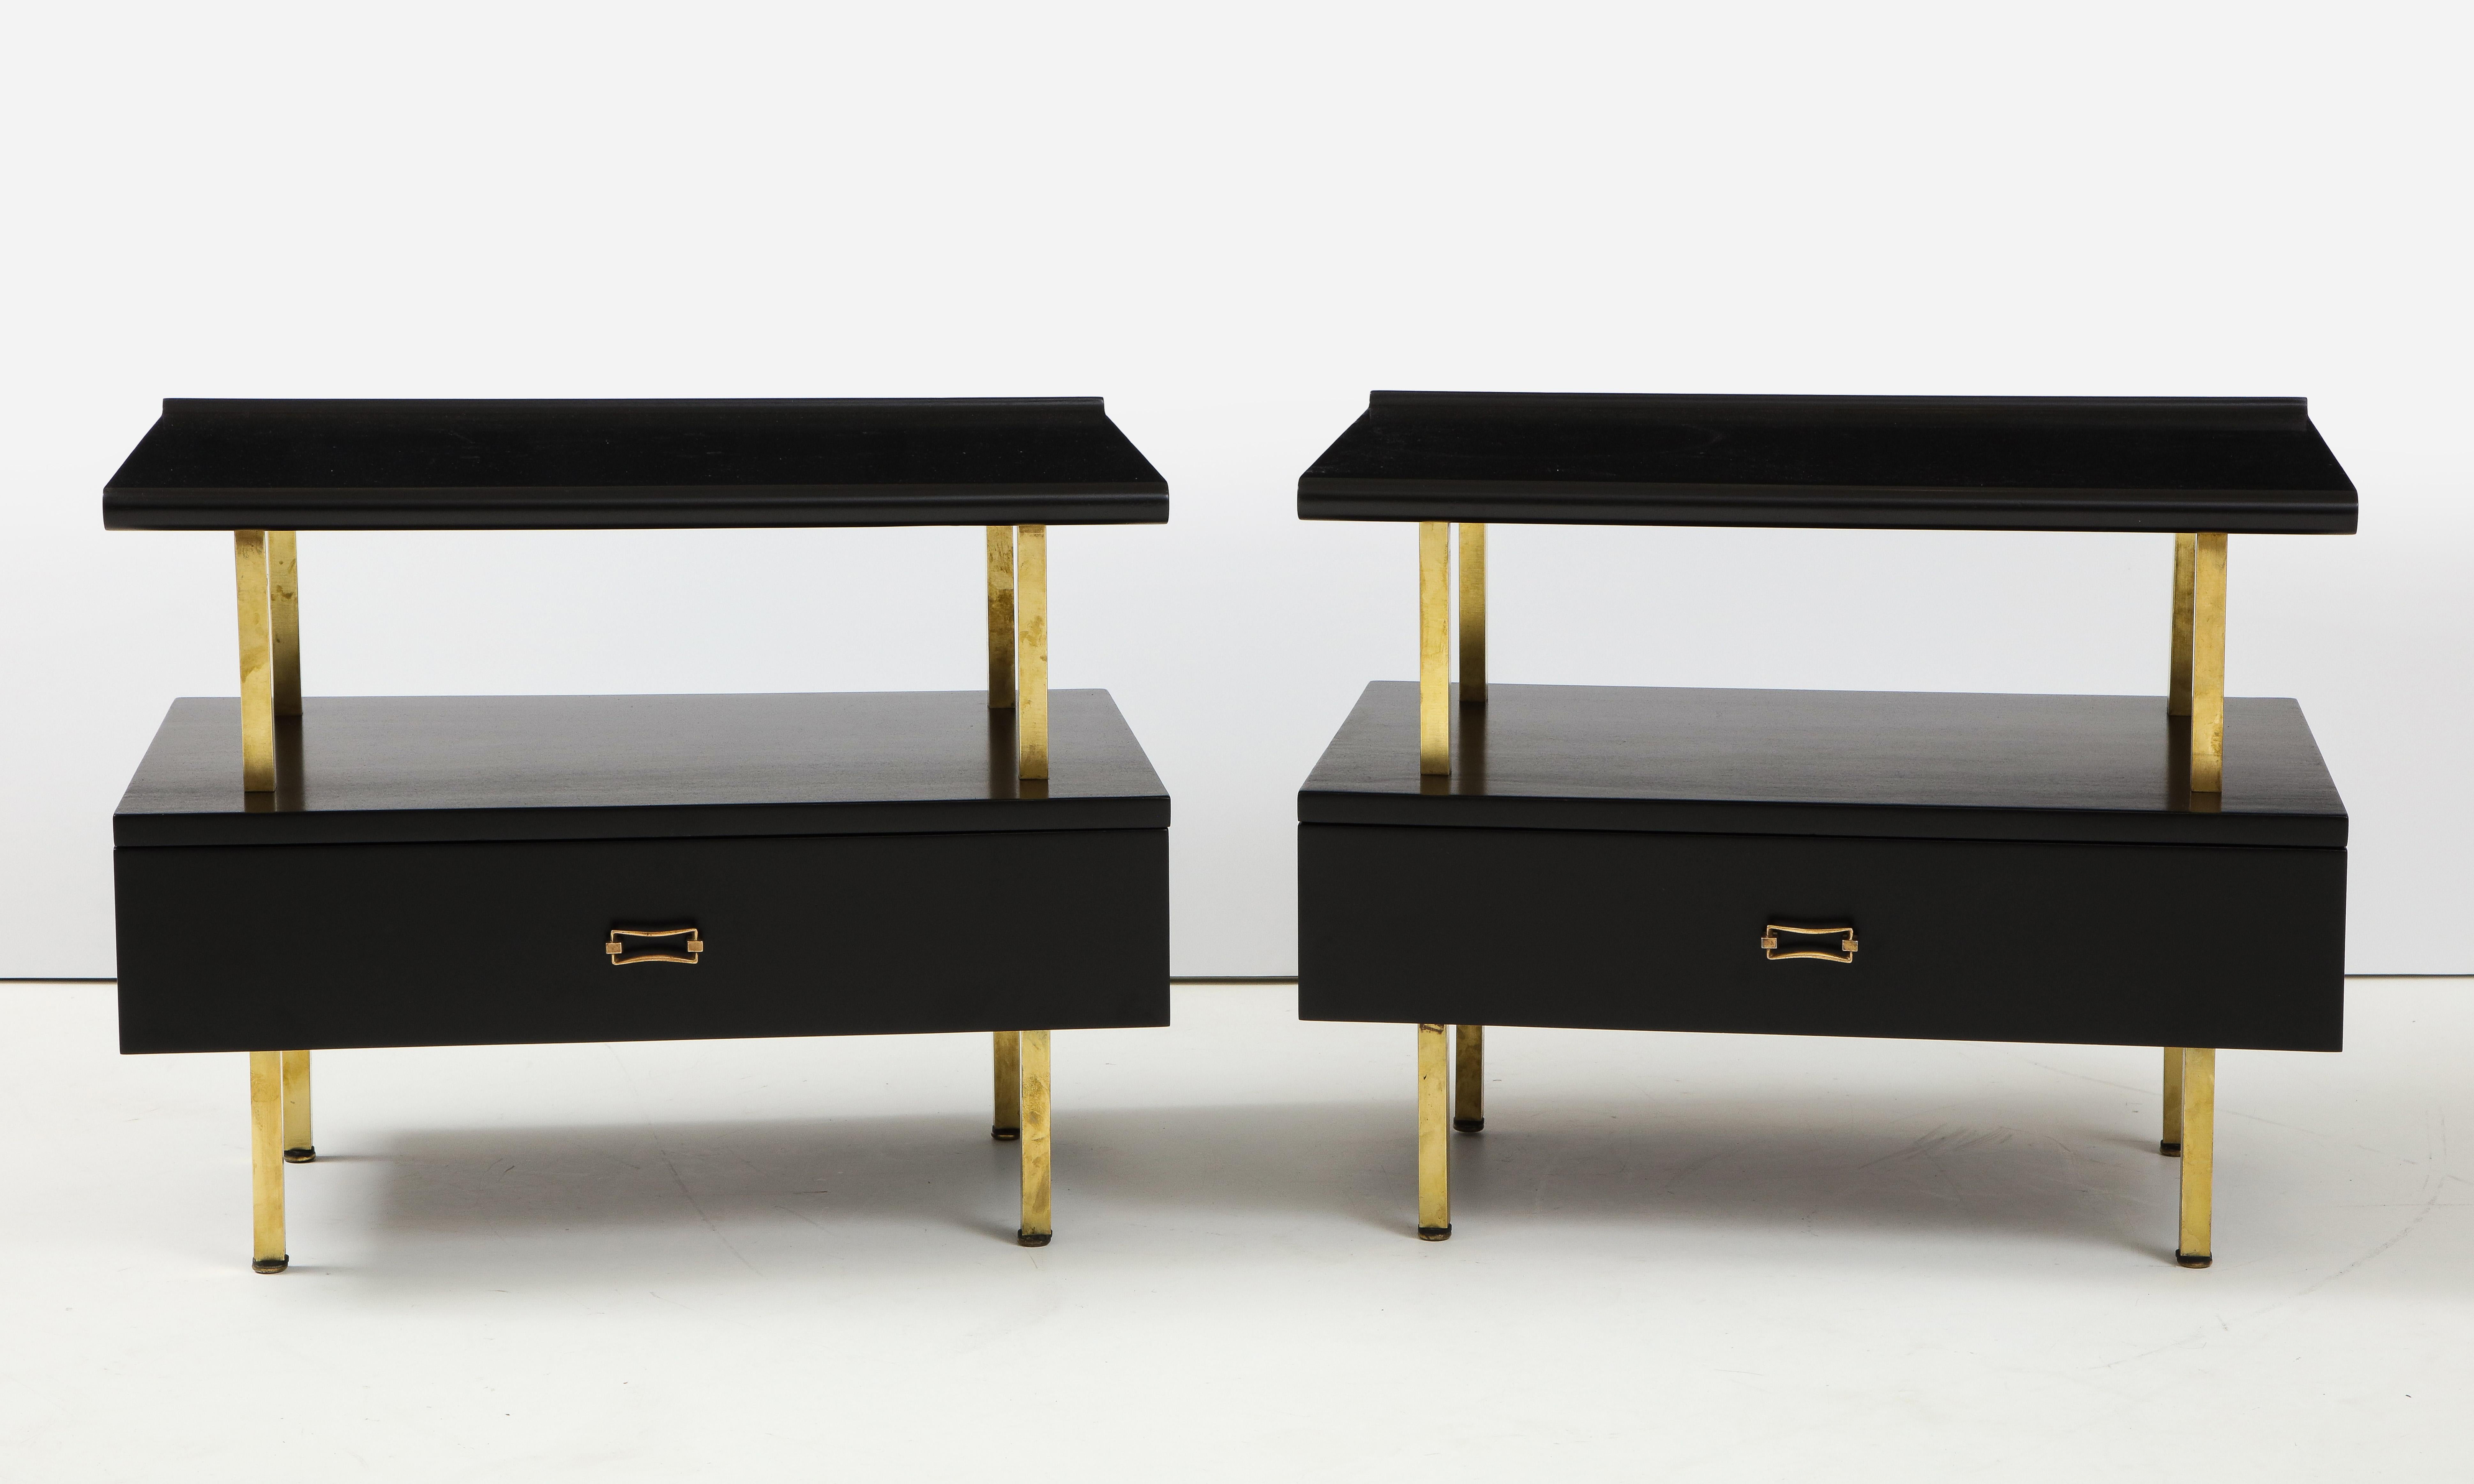 Stunning pair of 1960's Mid-Century Modern brass and black lacquer two tier end tables with brass hardware, fully restored with minor wear and patina due to age and use.